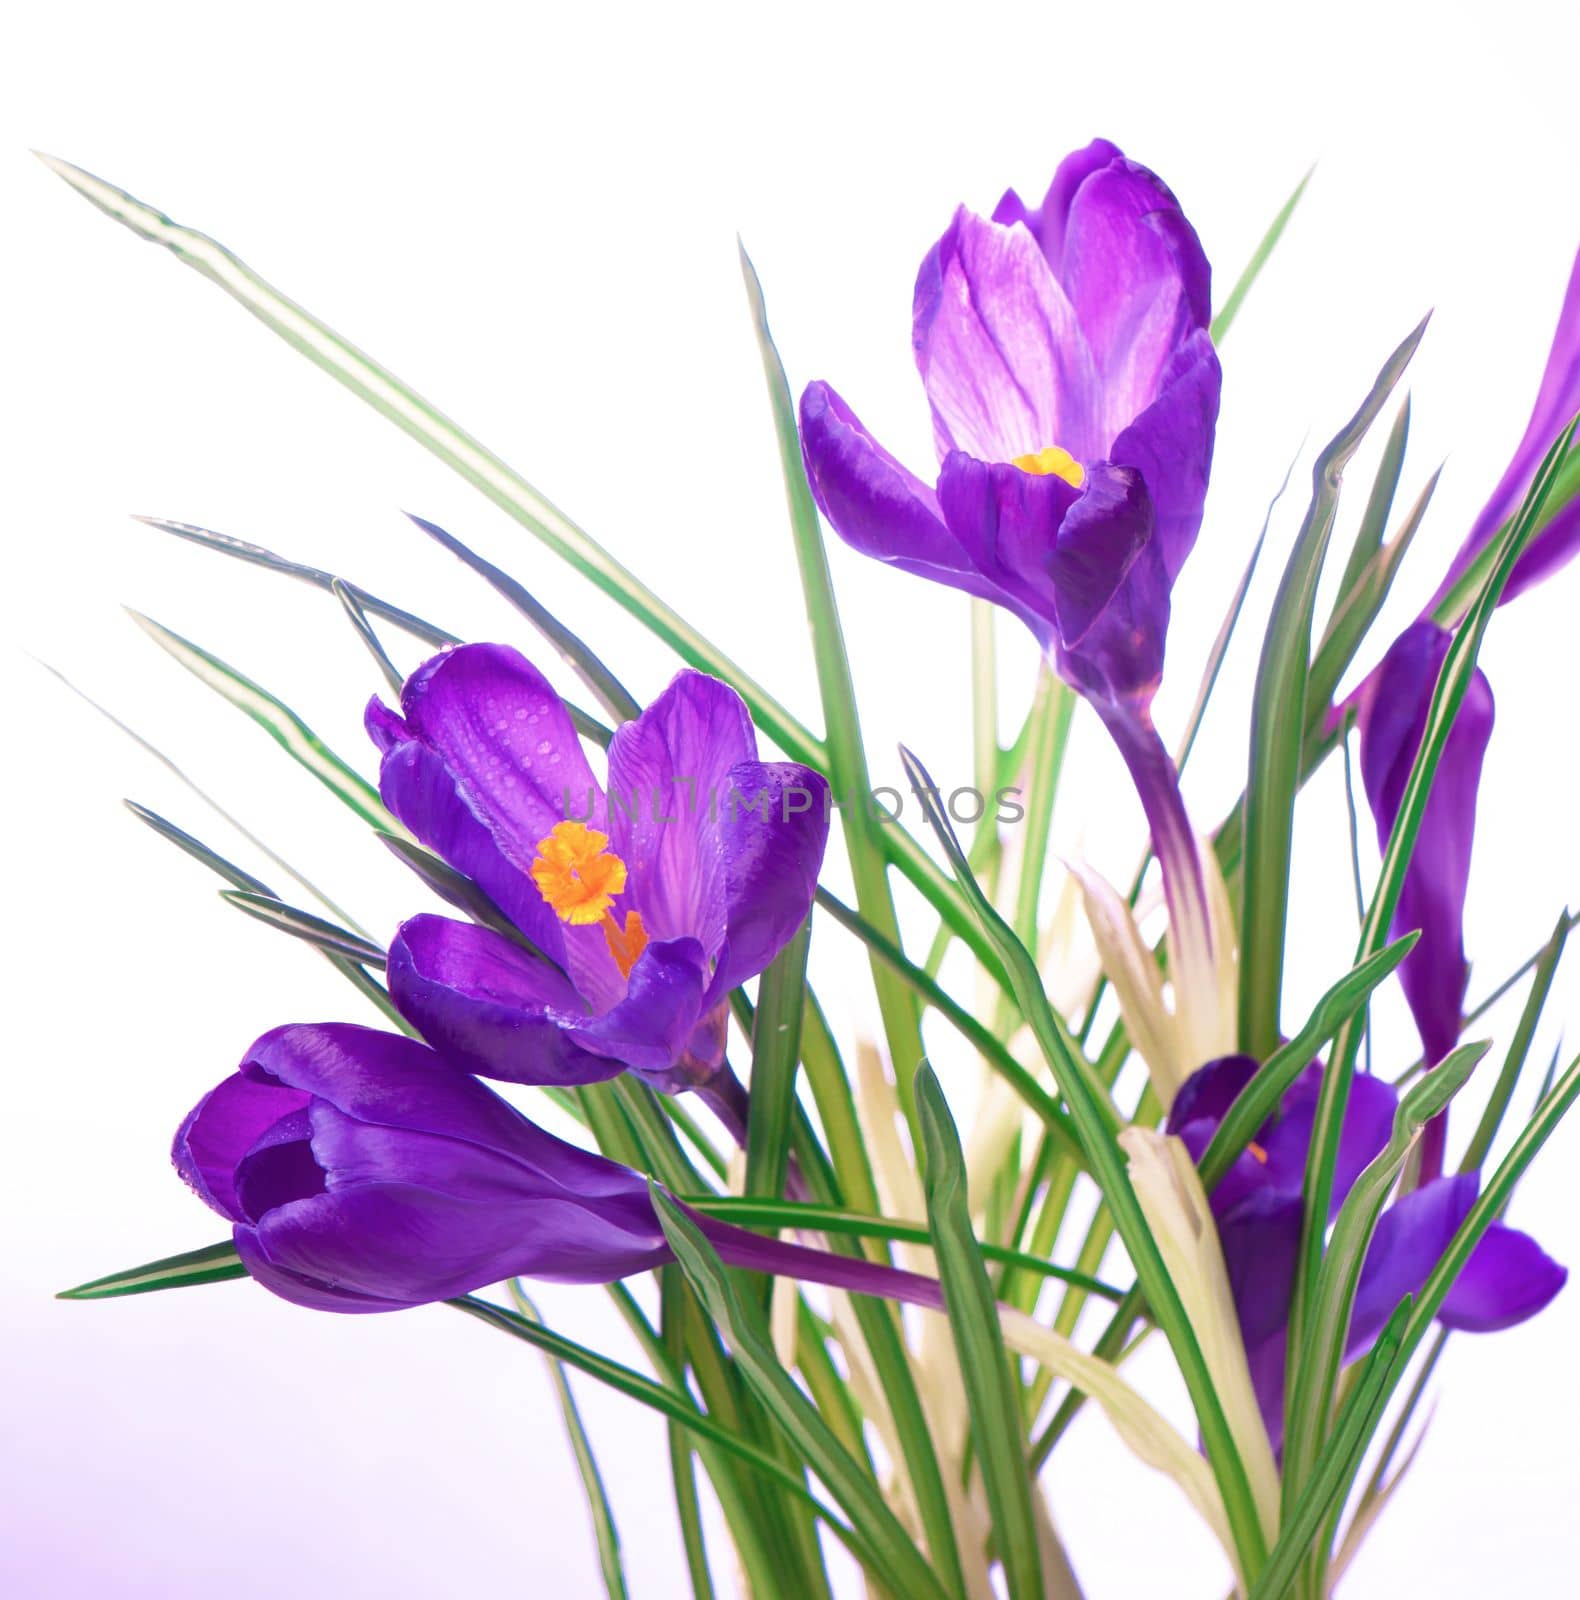 crocuses spring flowers on a white background by aprilphoto